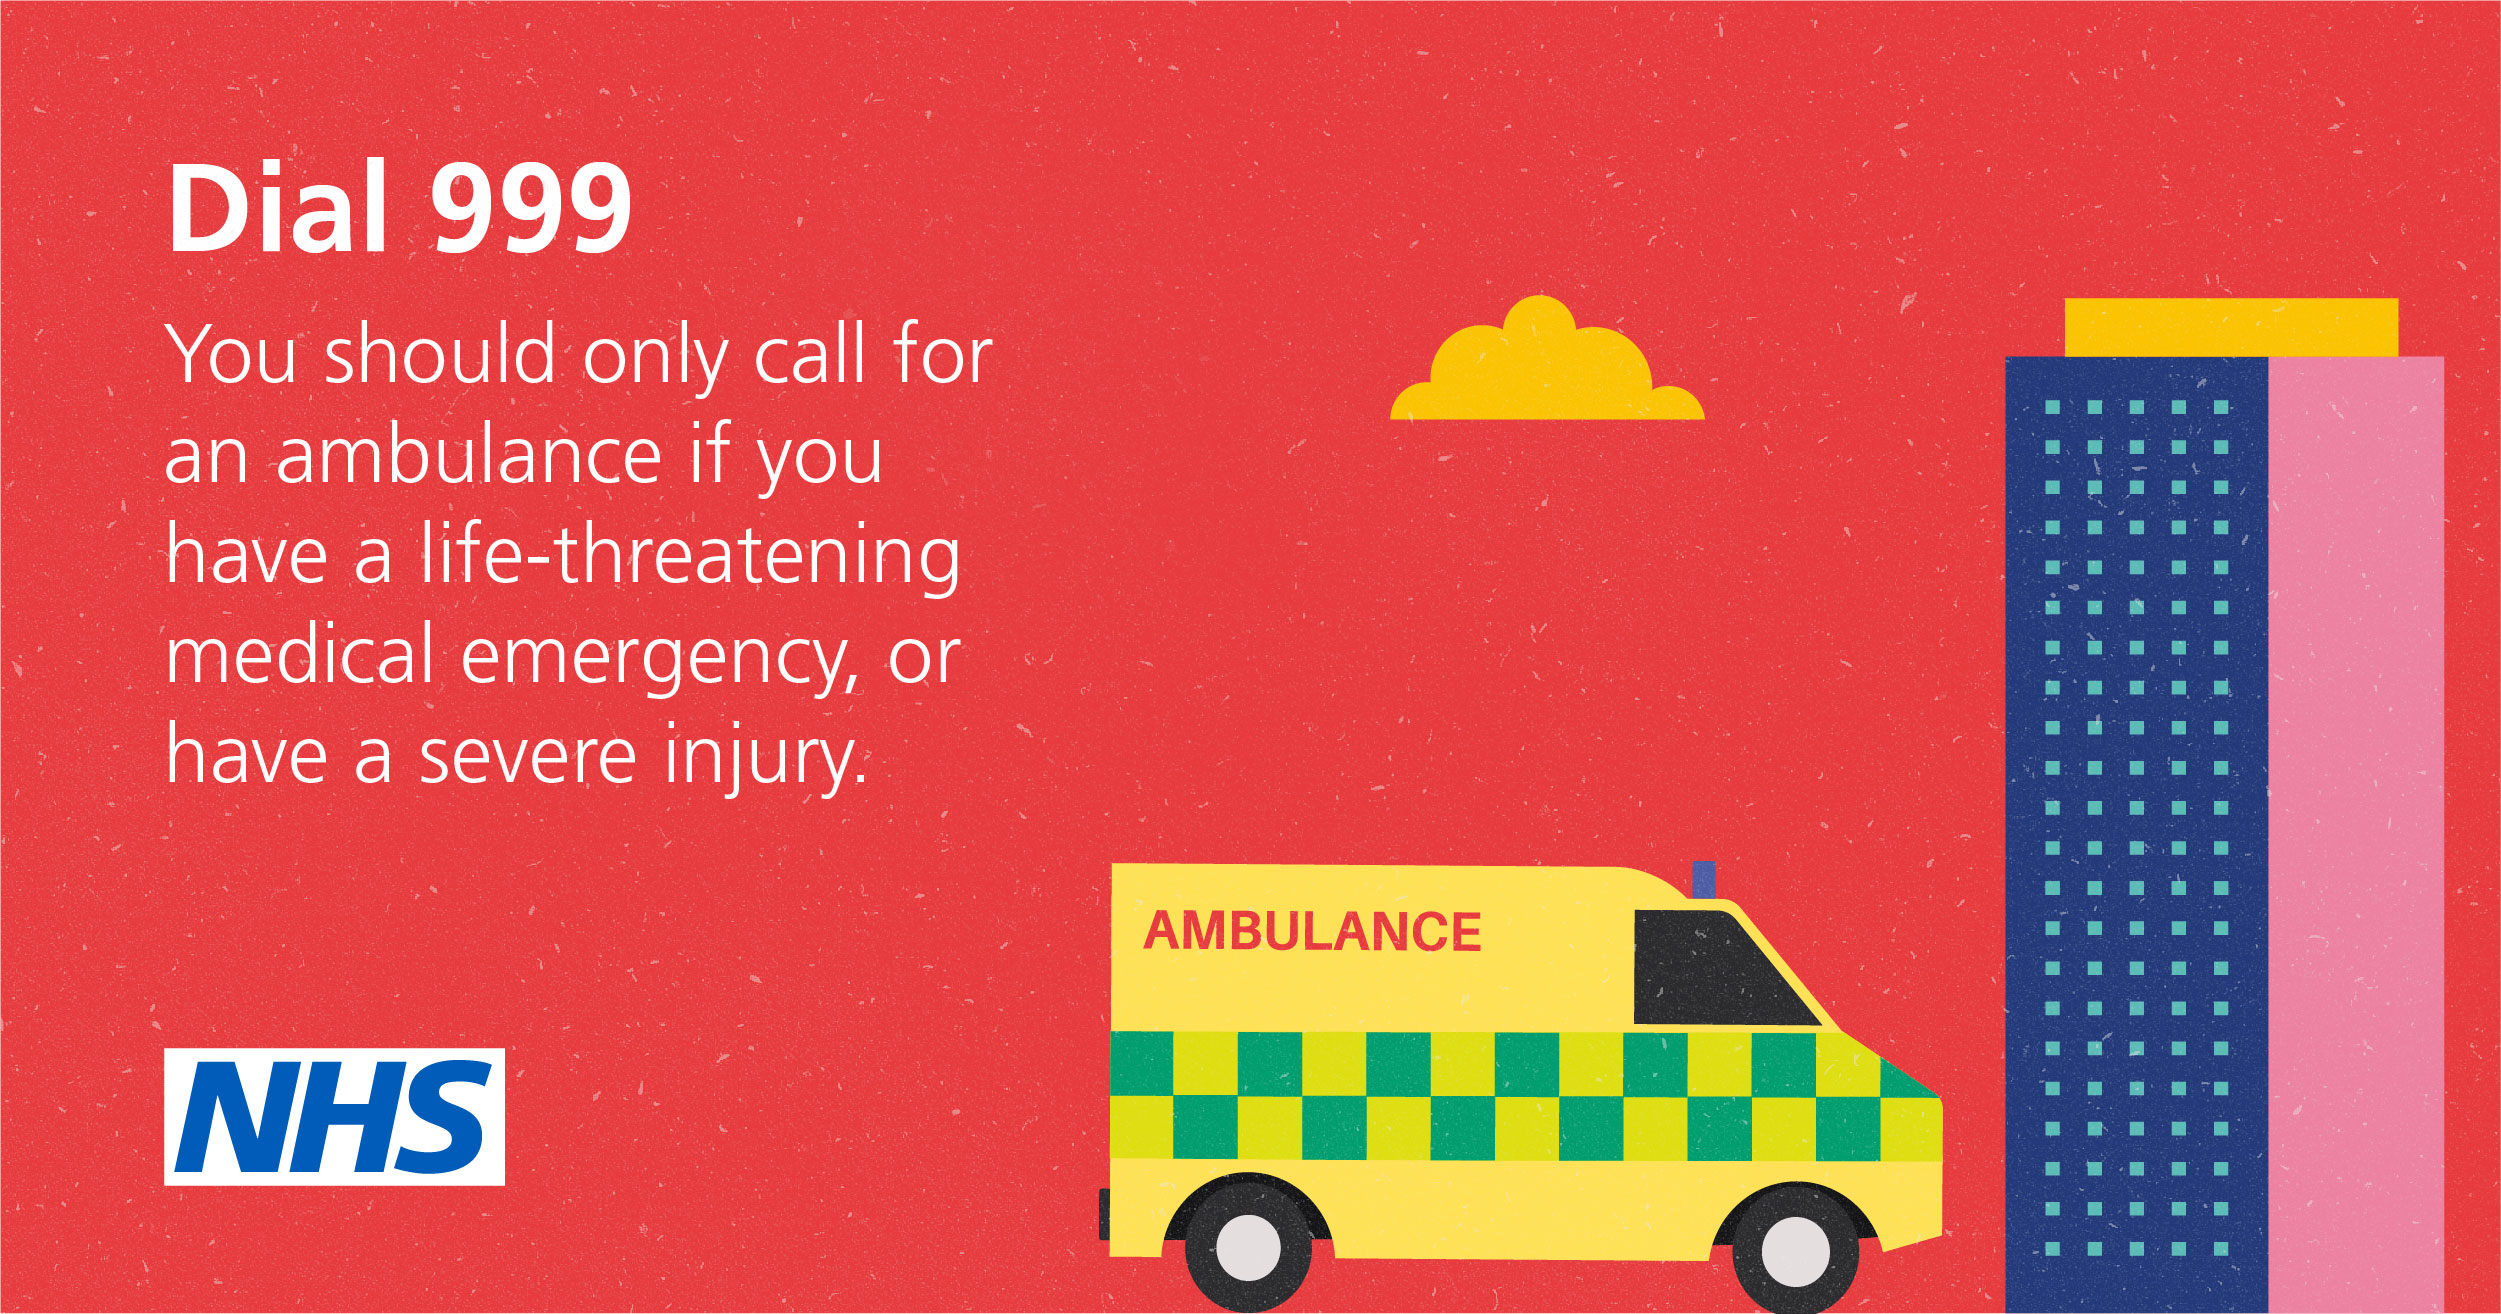 When to call 999